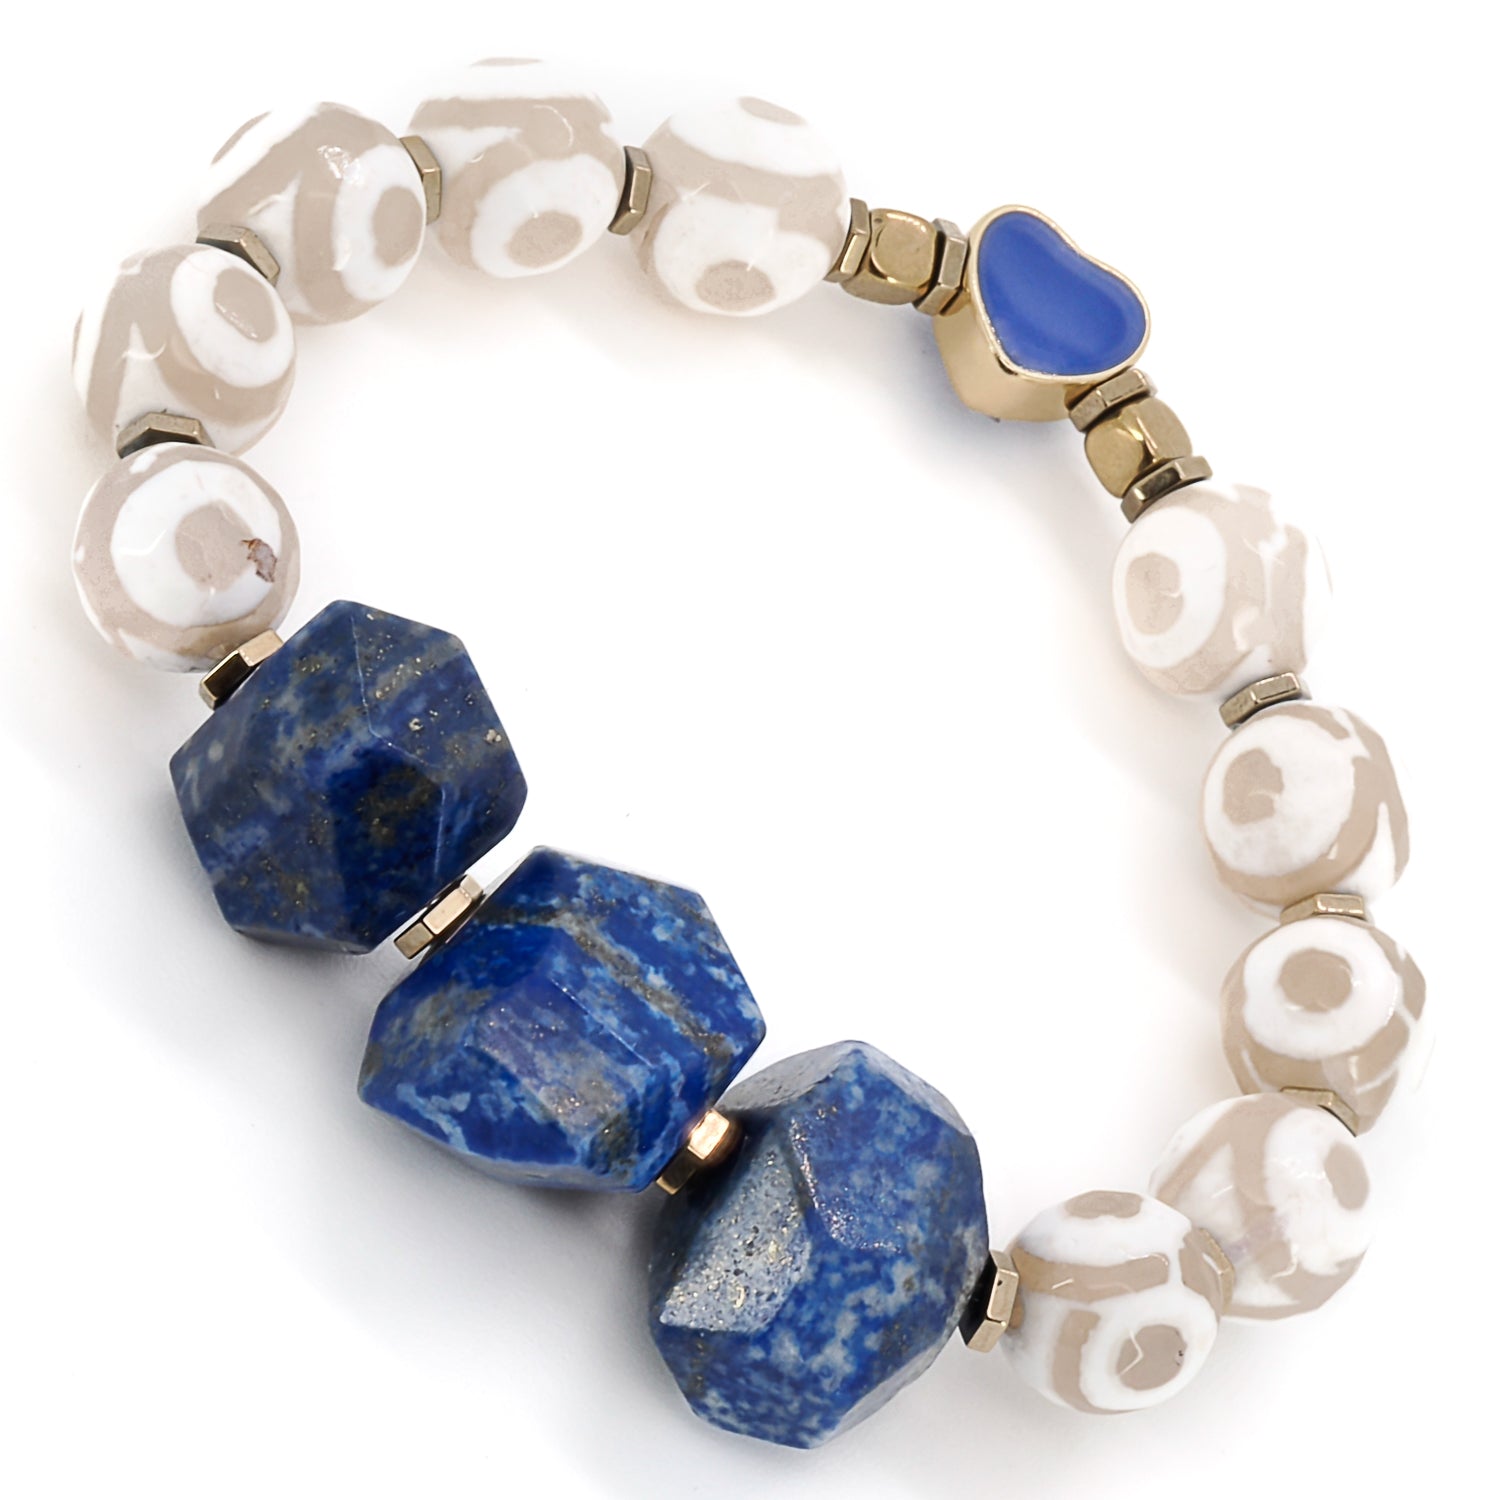 Striking Eye of Love Lapis Lazuli Bracelet - Handcrafted accessory featuring Lapis Lazuli, White Nepal agate, and a Gold plated blue enamel heart bead.